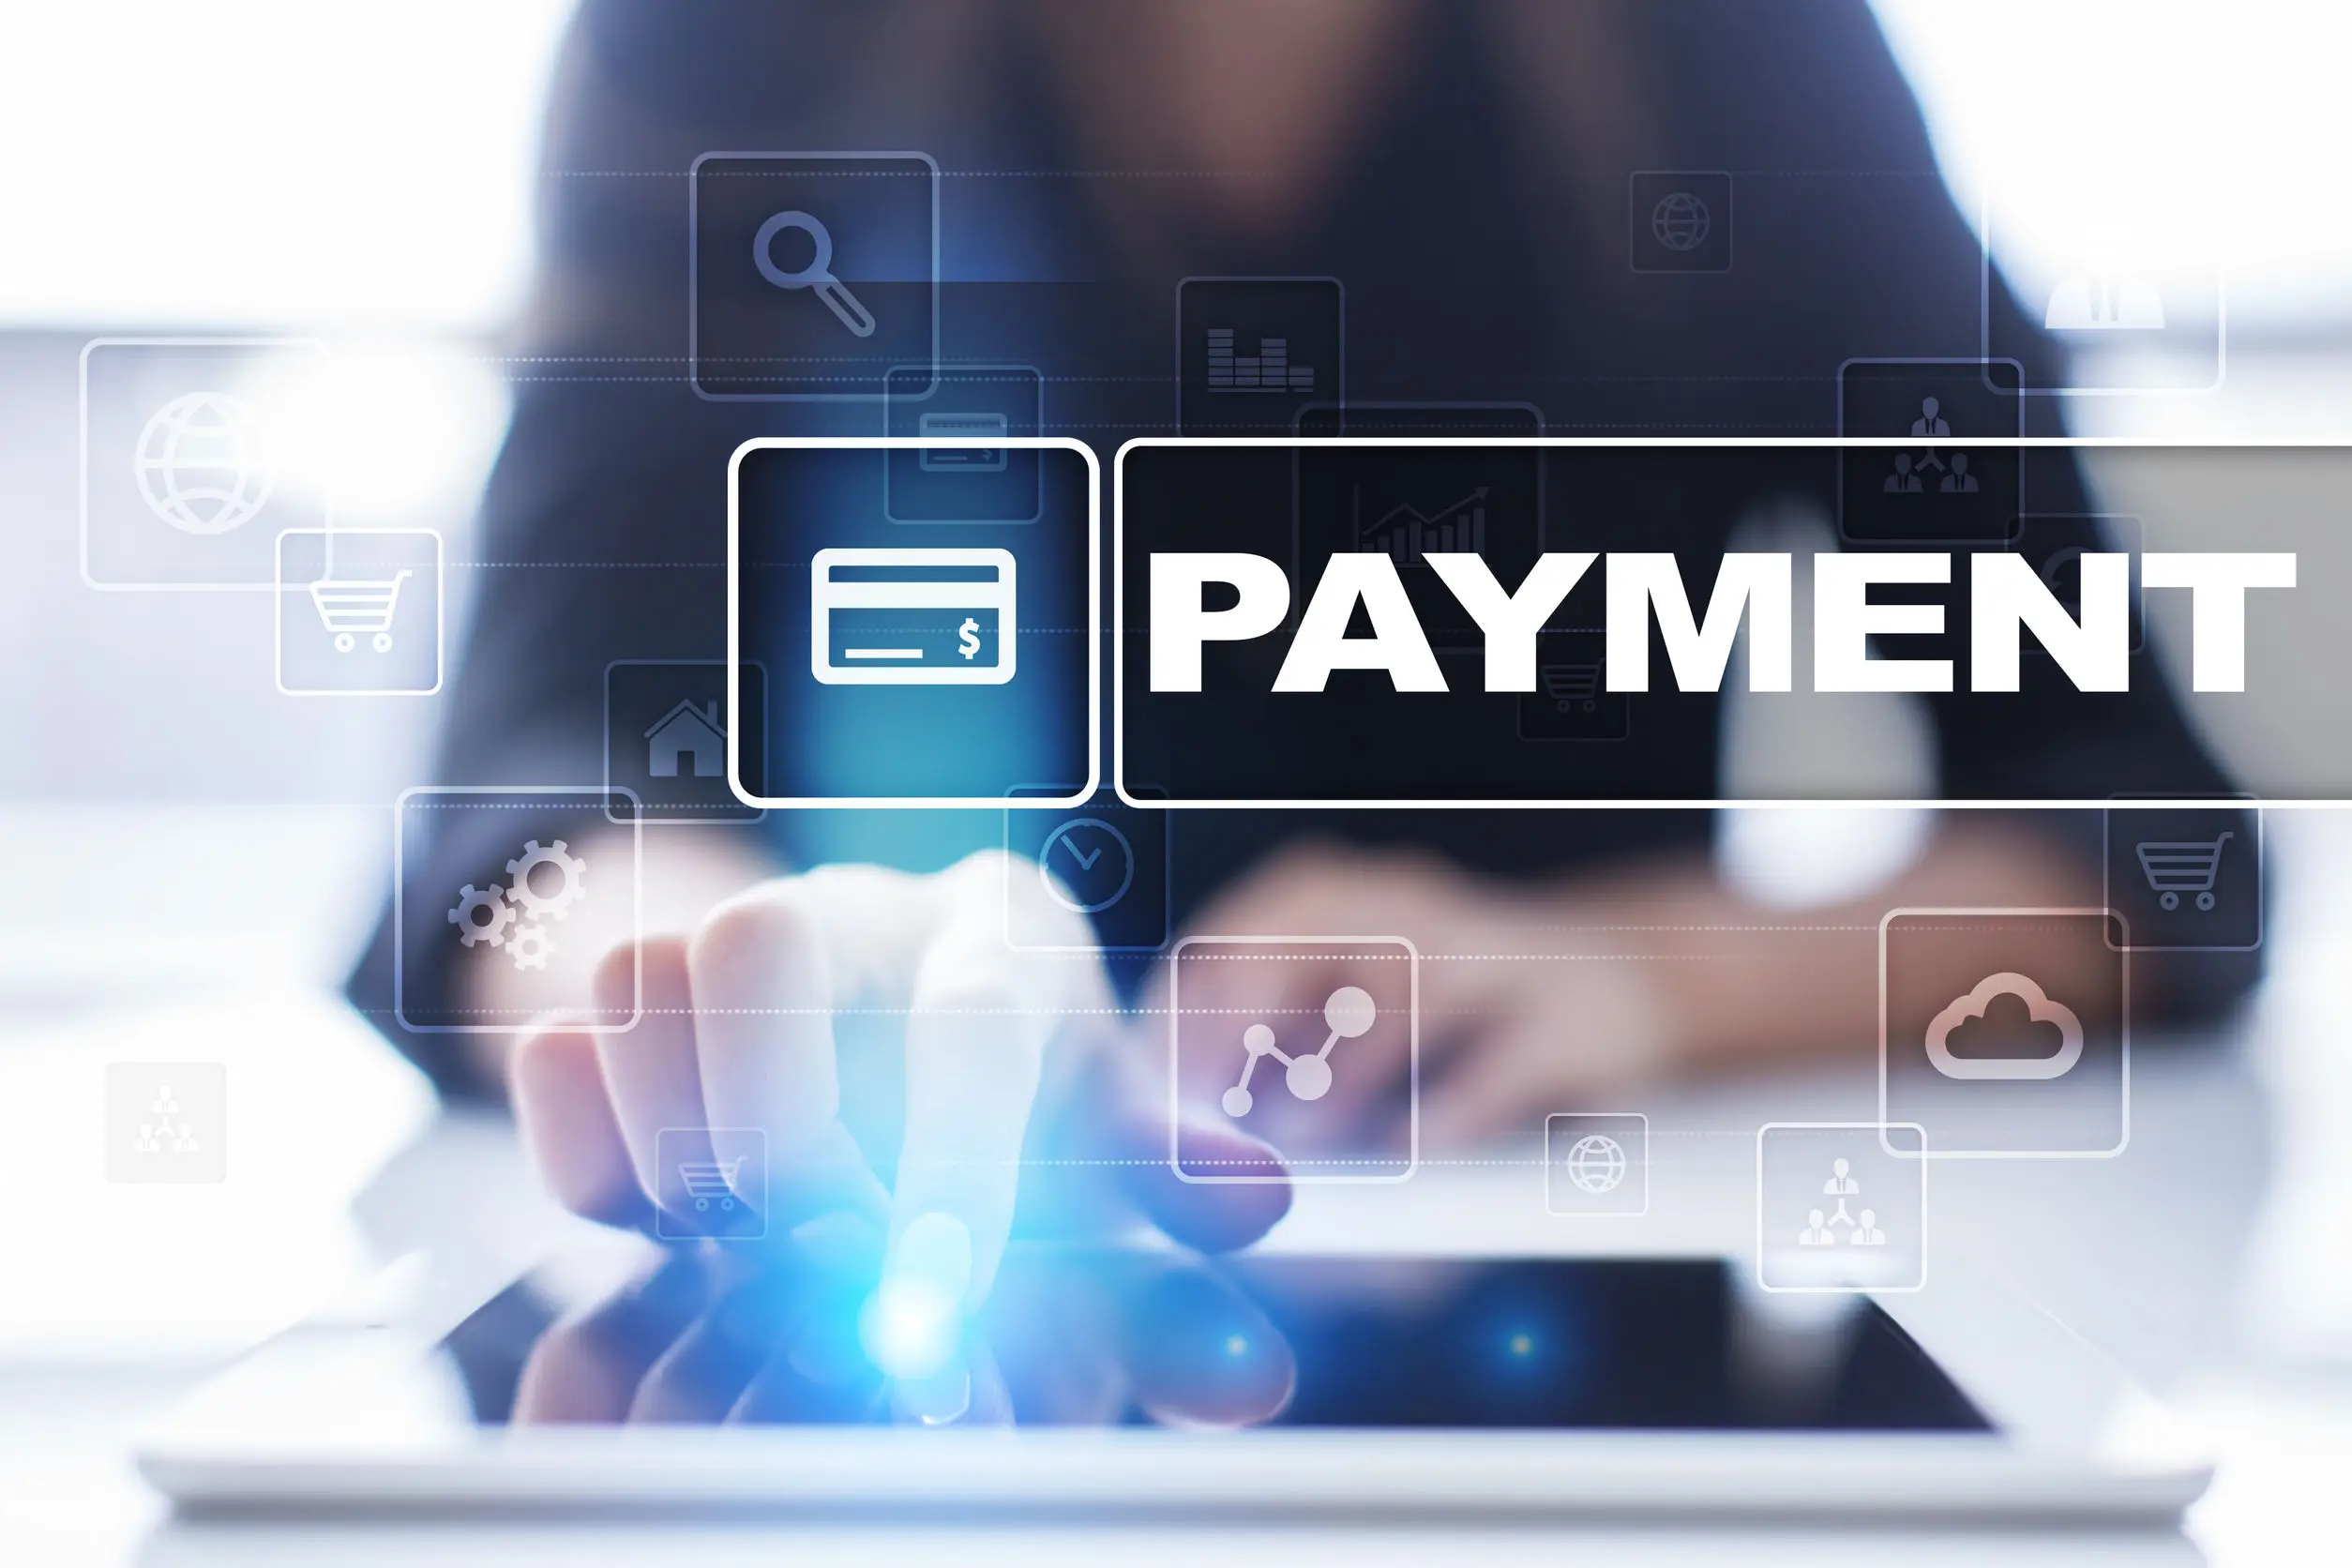 Global Payment Processing Solutions Market - Growth, Current Trends, and Forecast